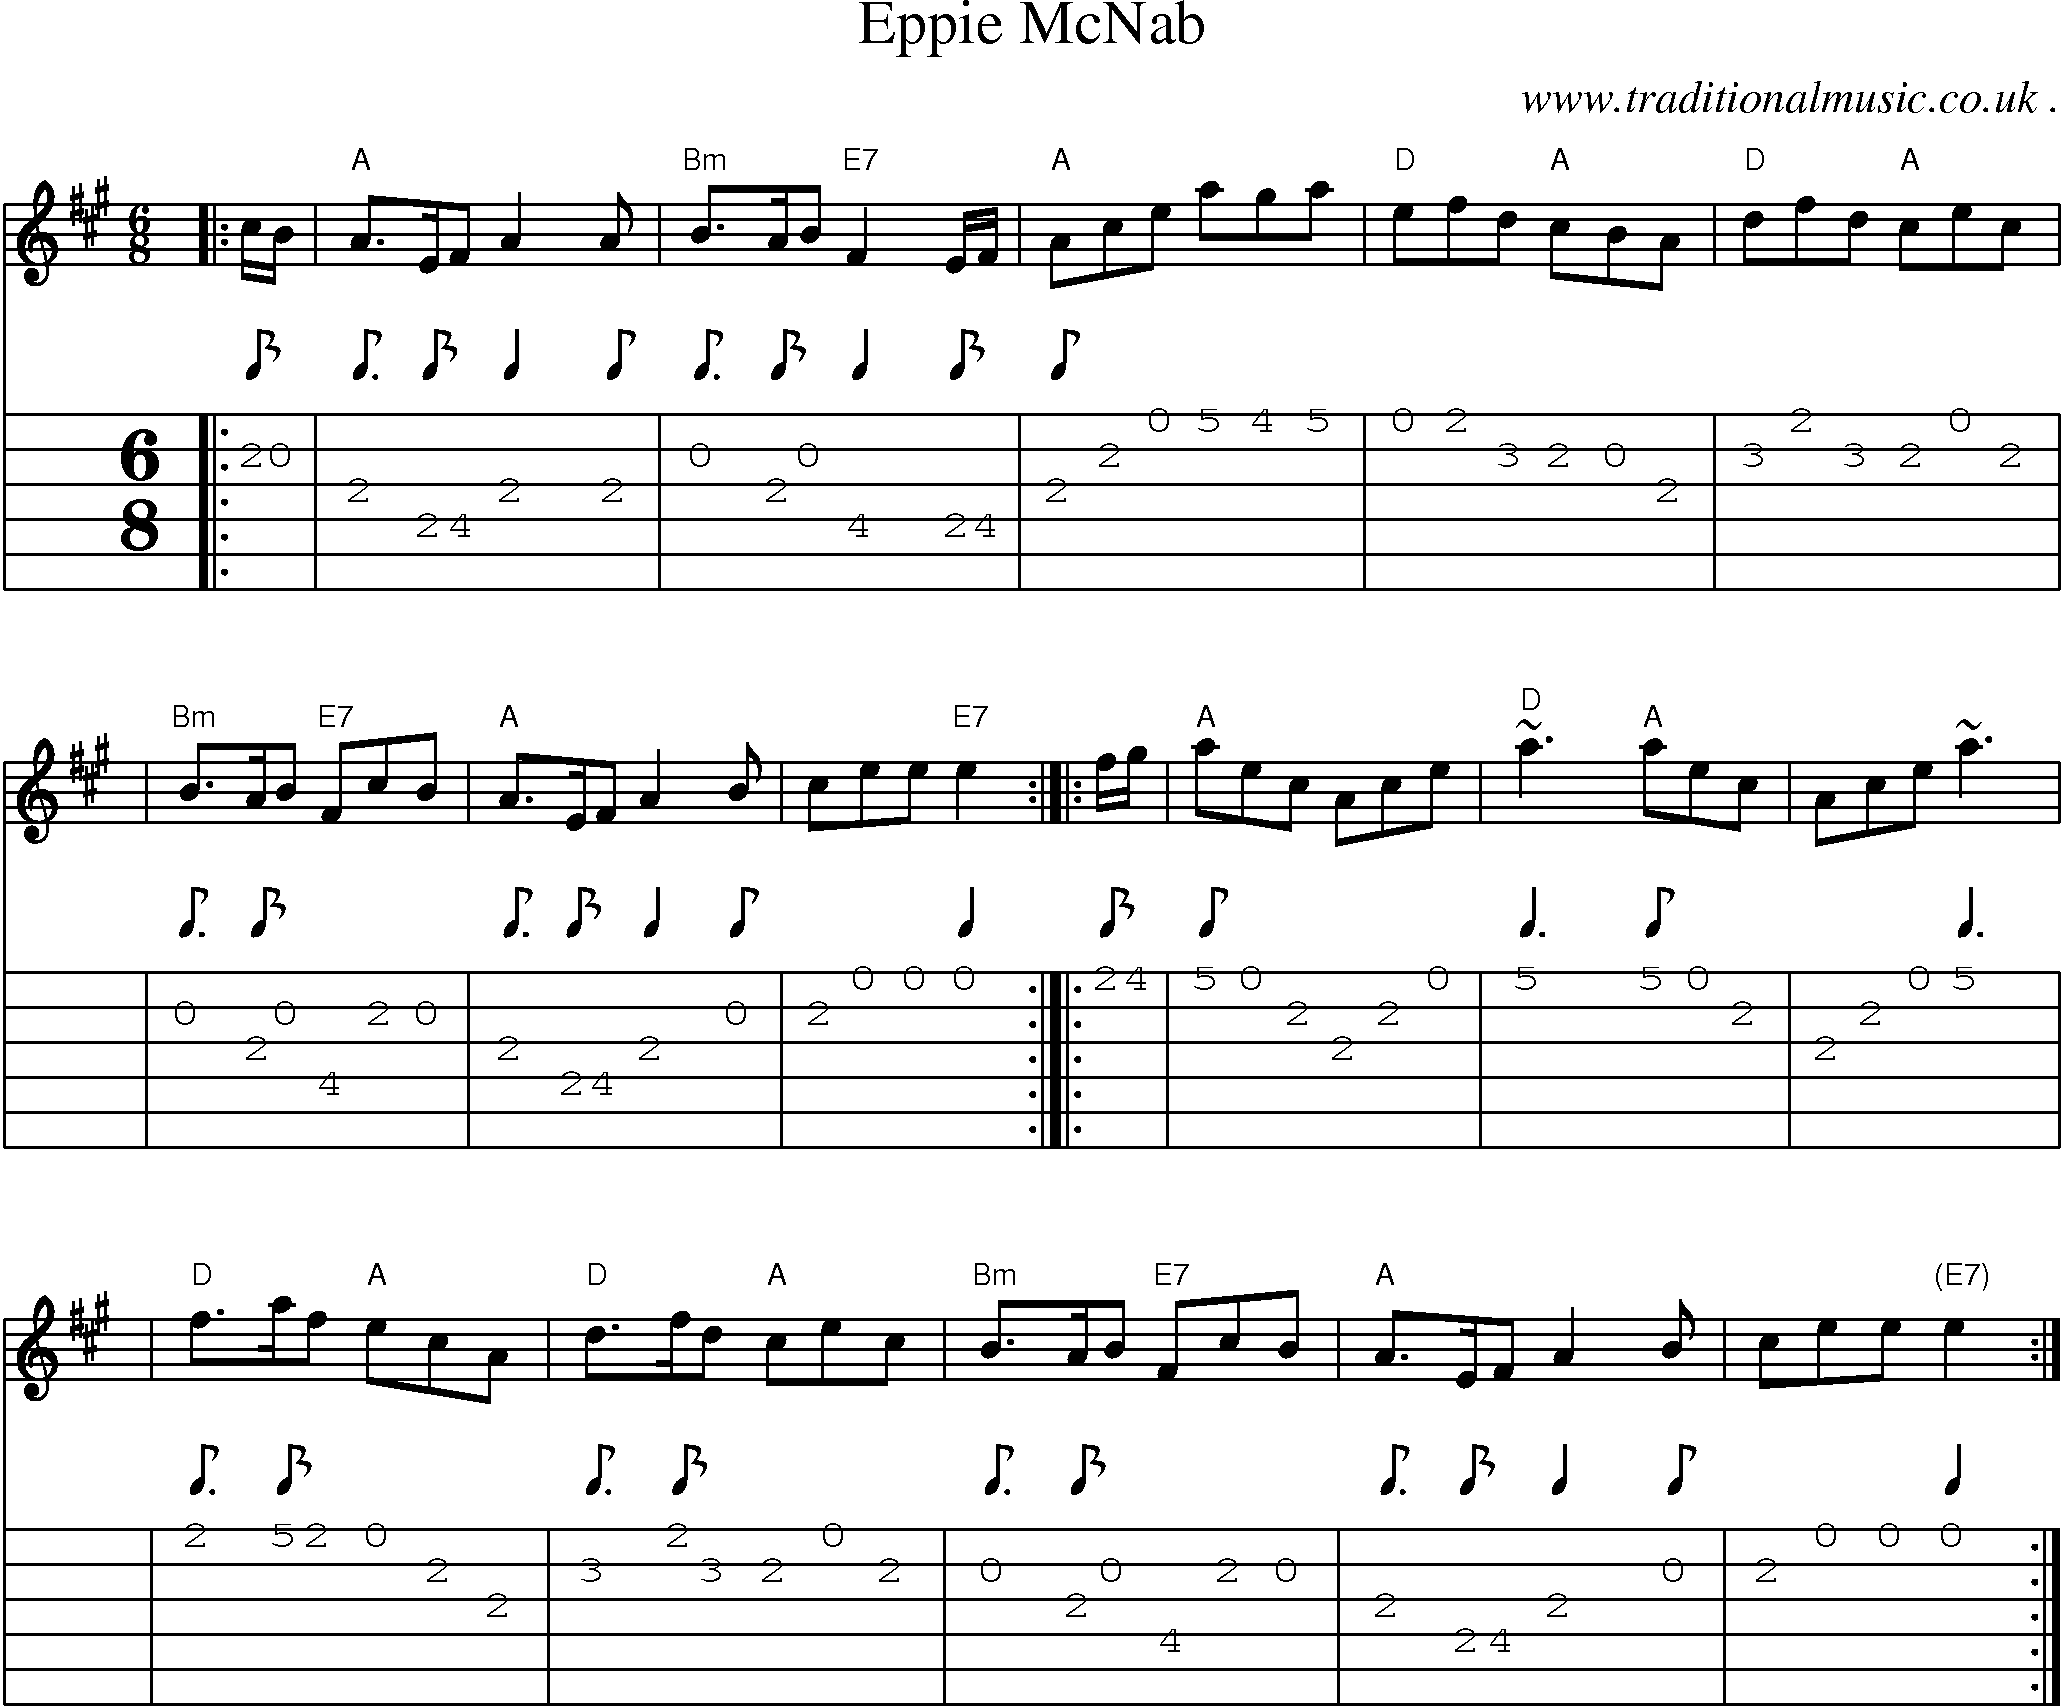 Sheet-music  score, Chords and Guitar Tabs for Eppie Mcnab